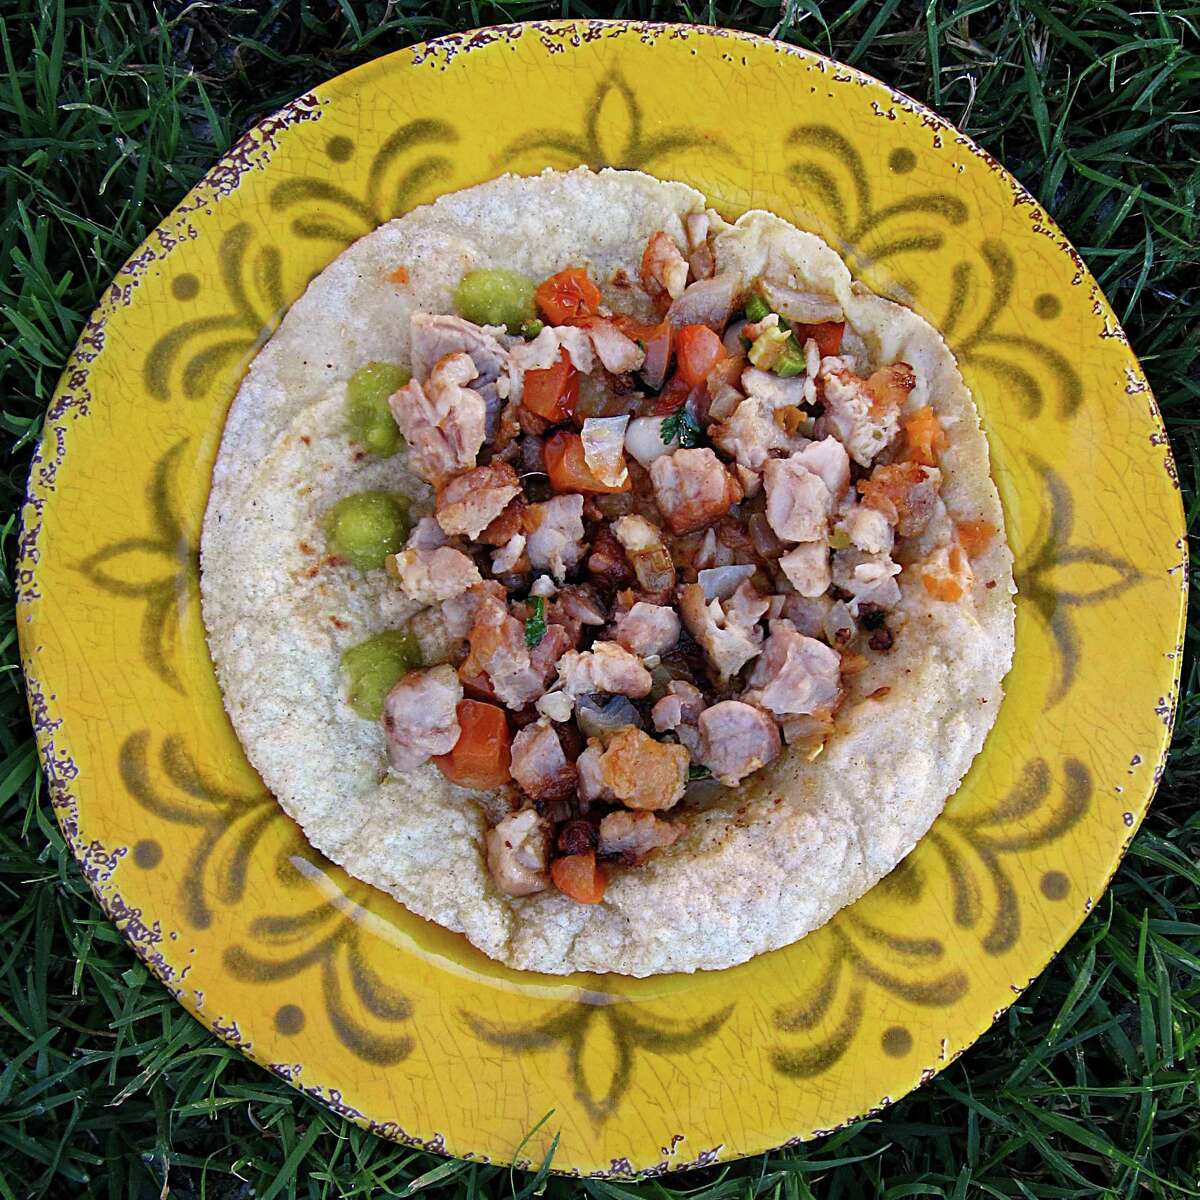 Taco of the Week: Mollejas (sweetbreads) taco on a handmade corn tortilla from Mittman Fine Foods.